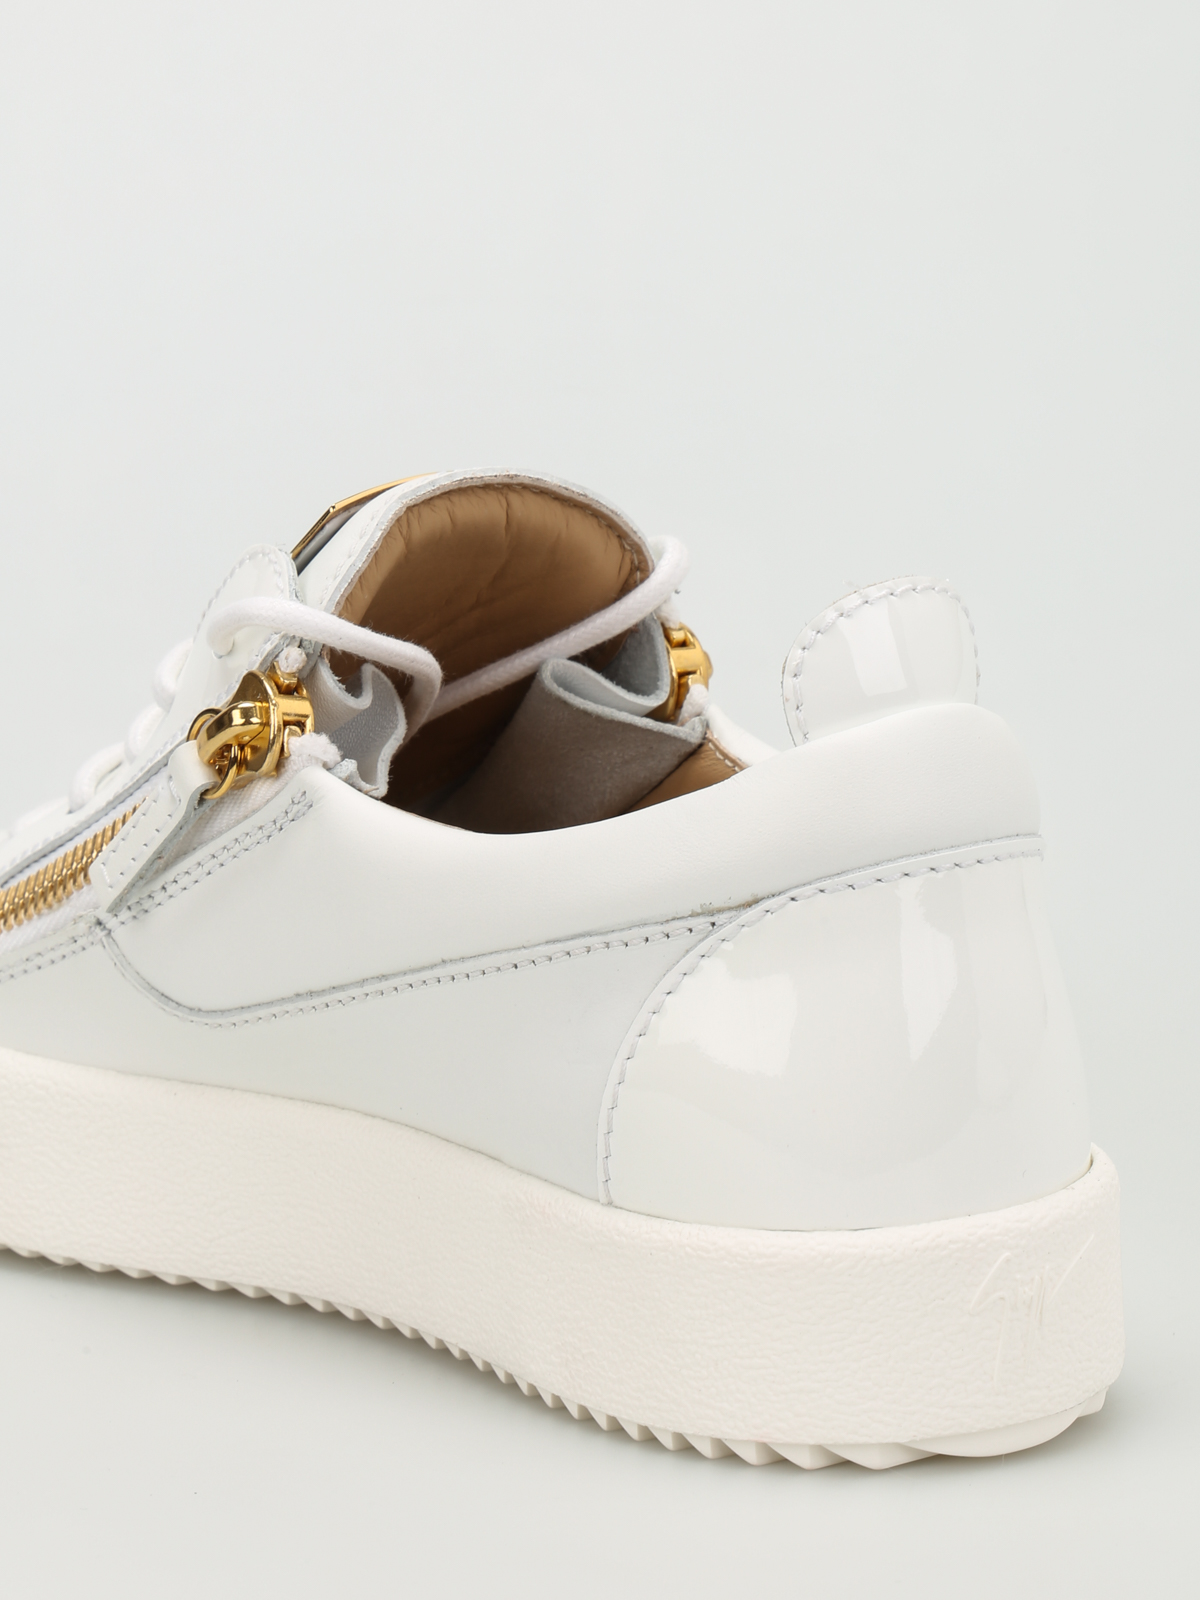 ønske Oprigtighed Ærlig Trainers Giuseppe Zanotti - May London leather low top sneakers - RW70000001